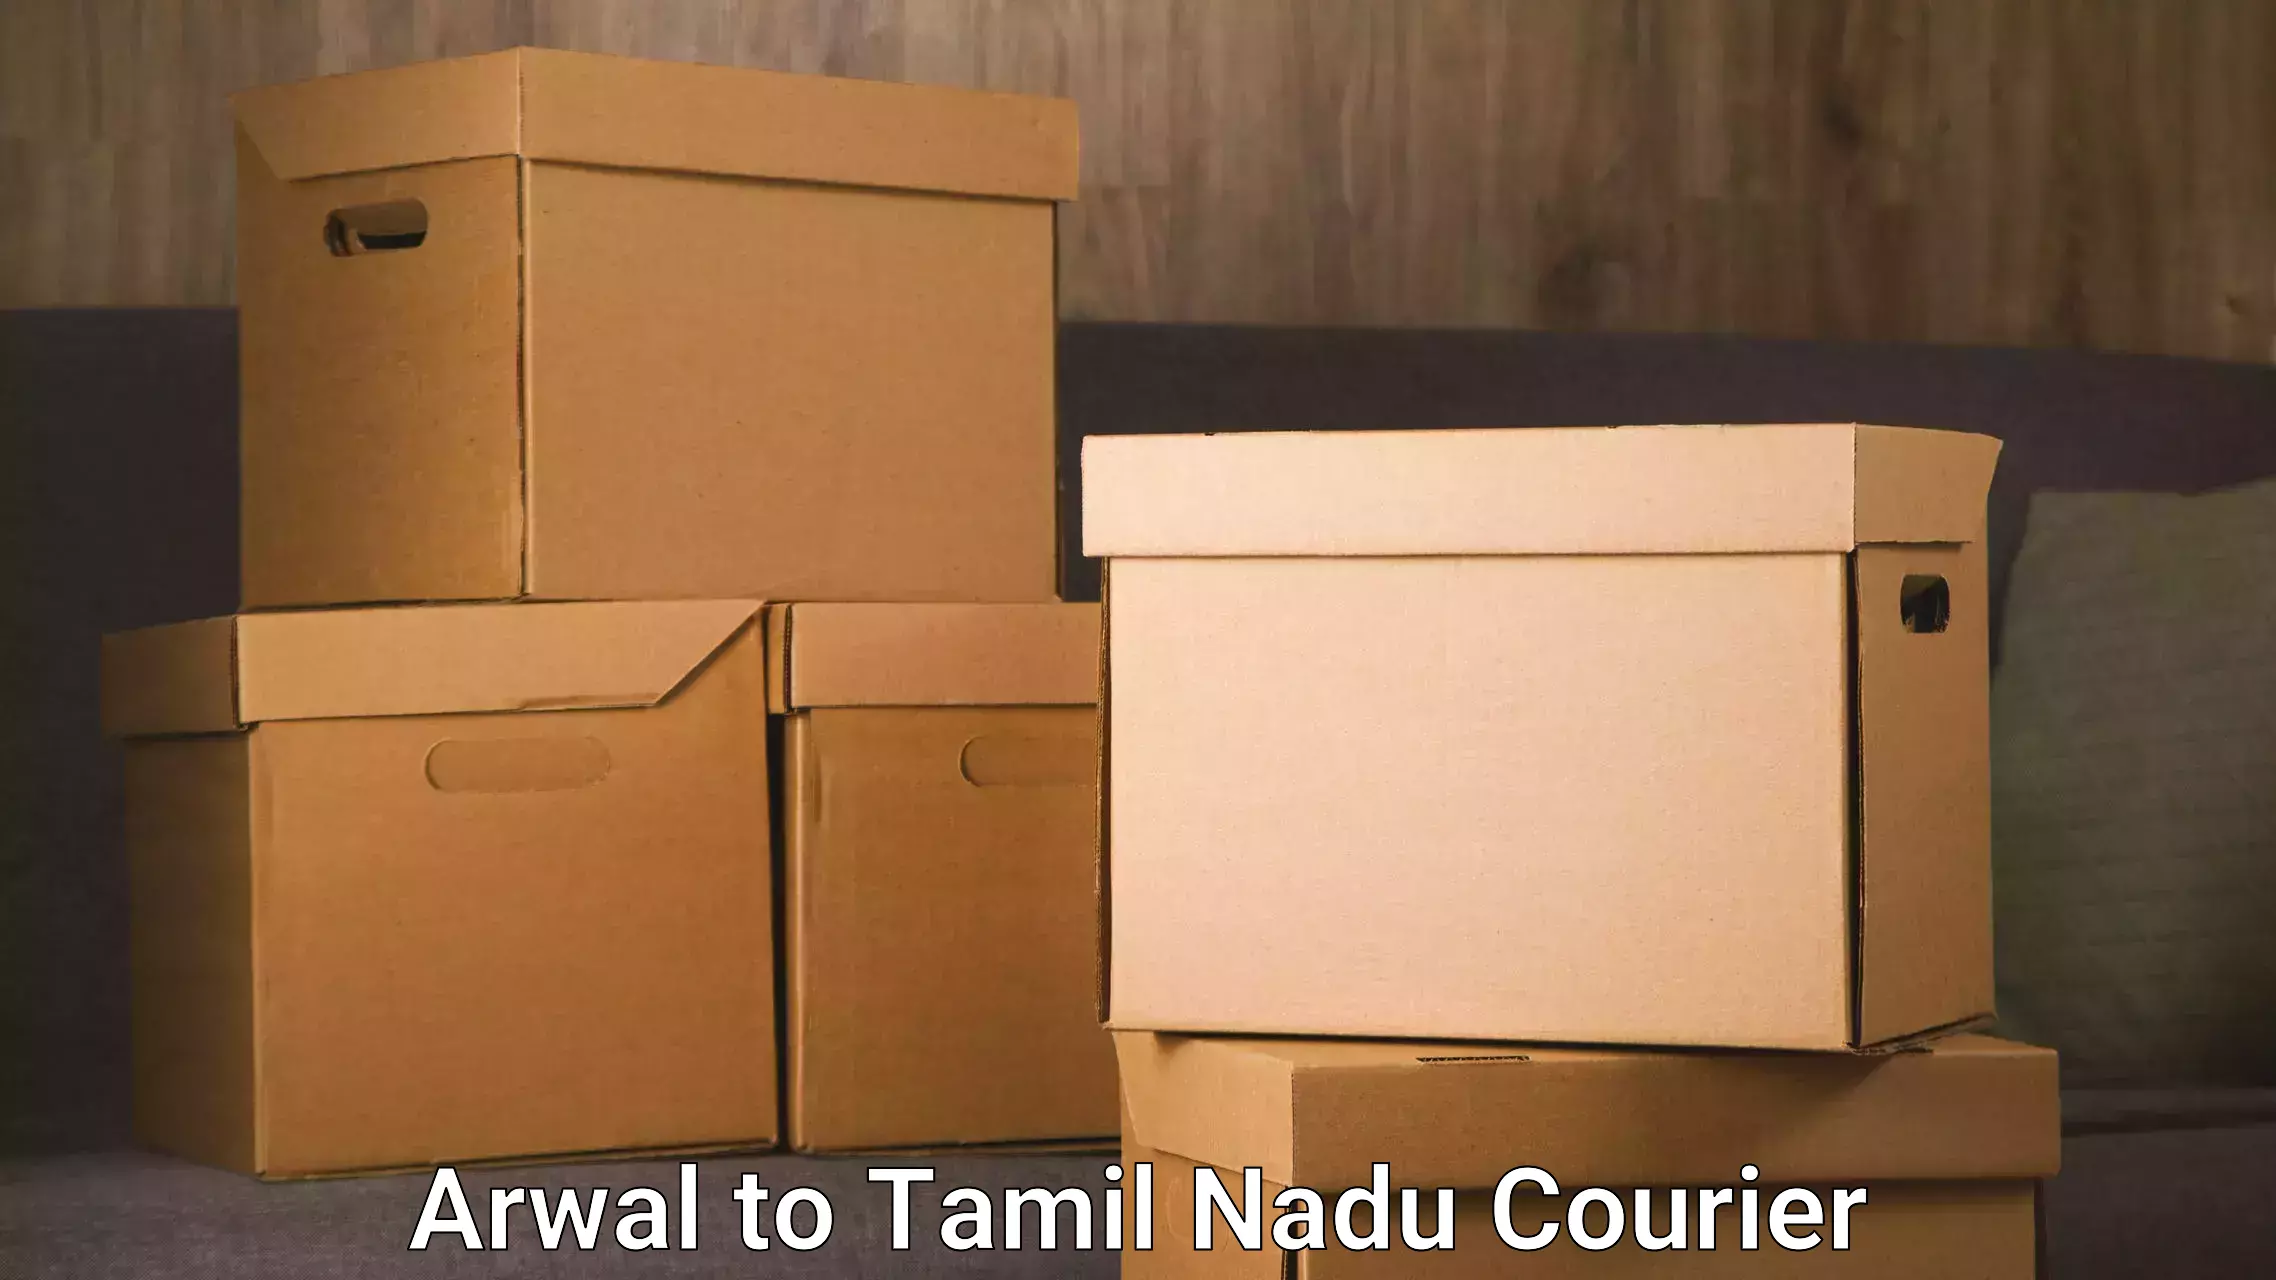 Trusted relocation experts Arwal to Meenakshi Academy of Higher Education and Research Chennai